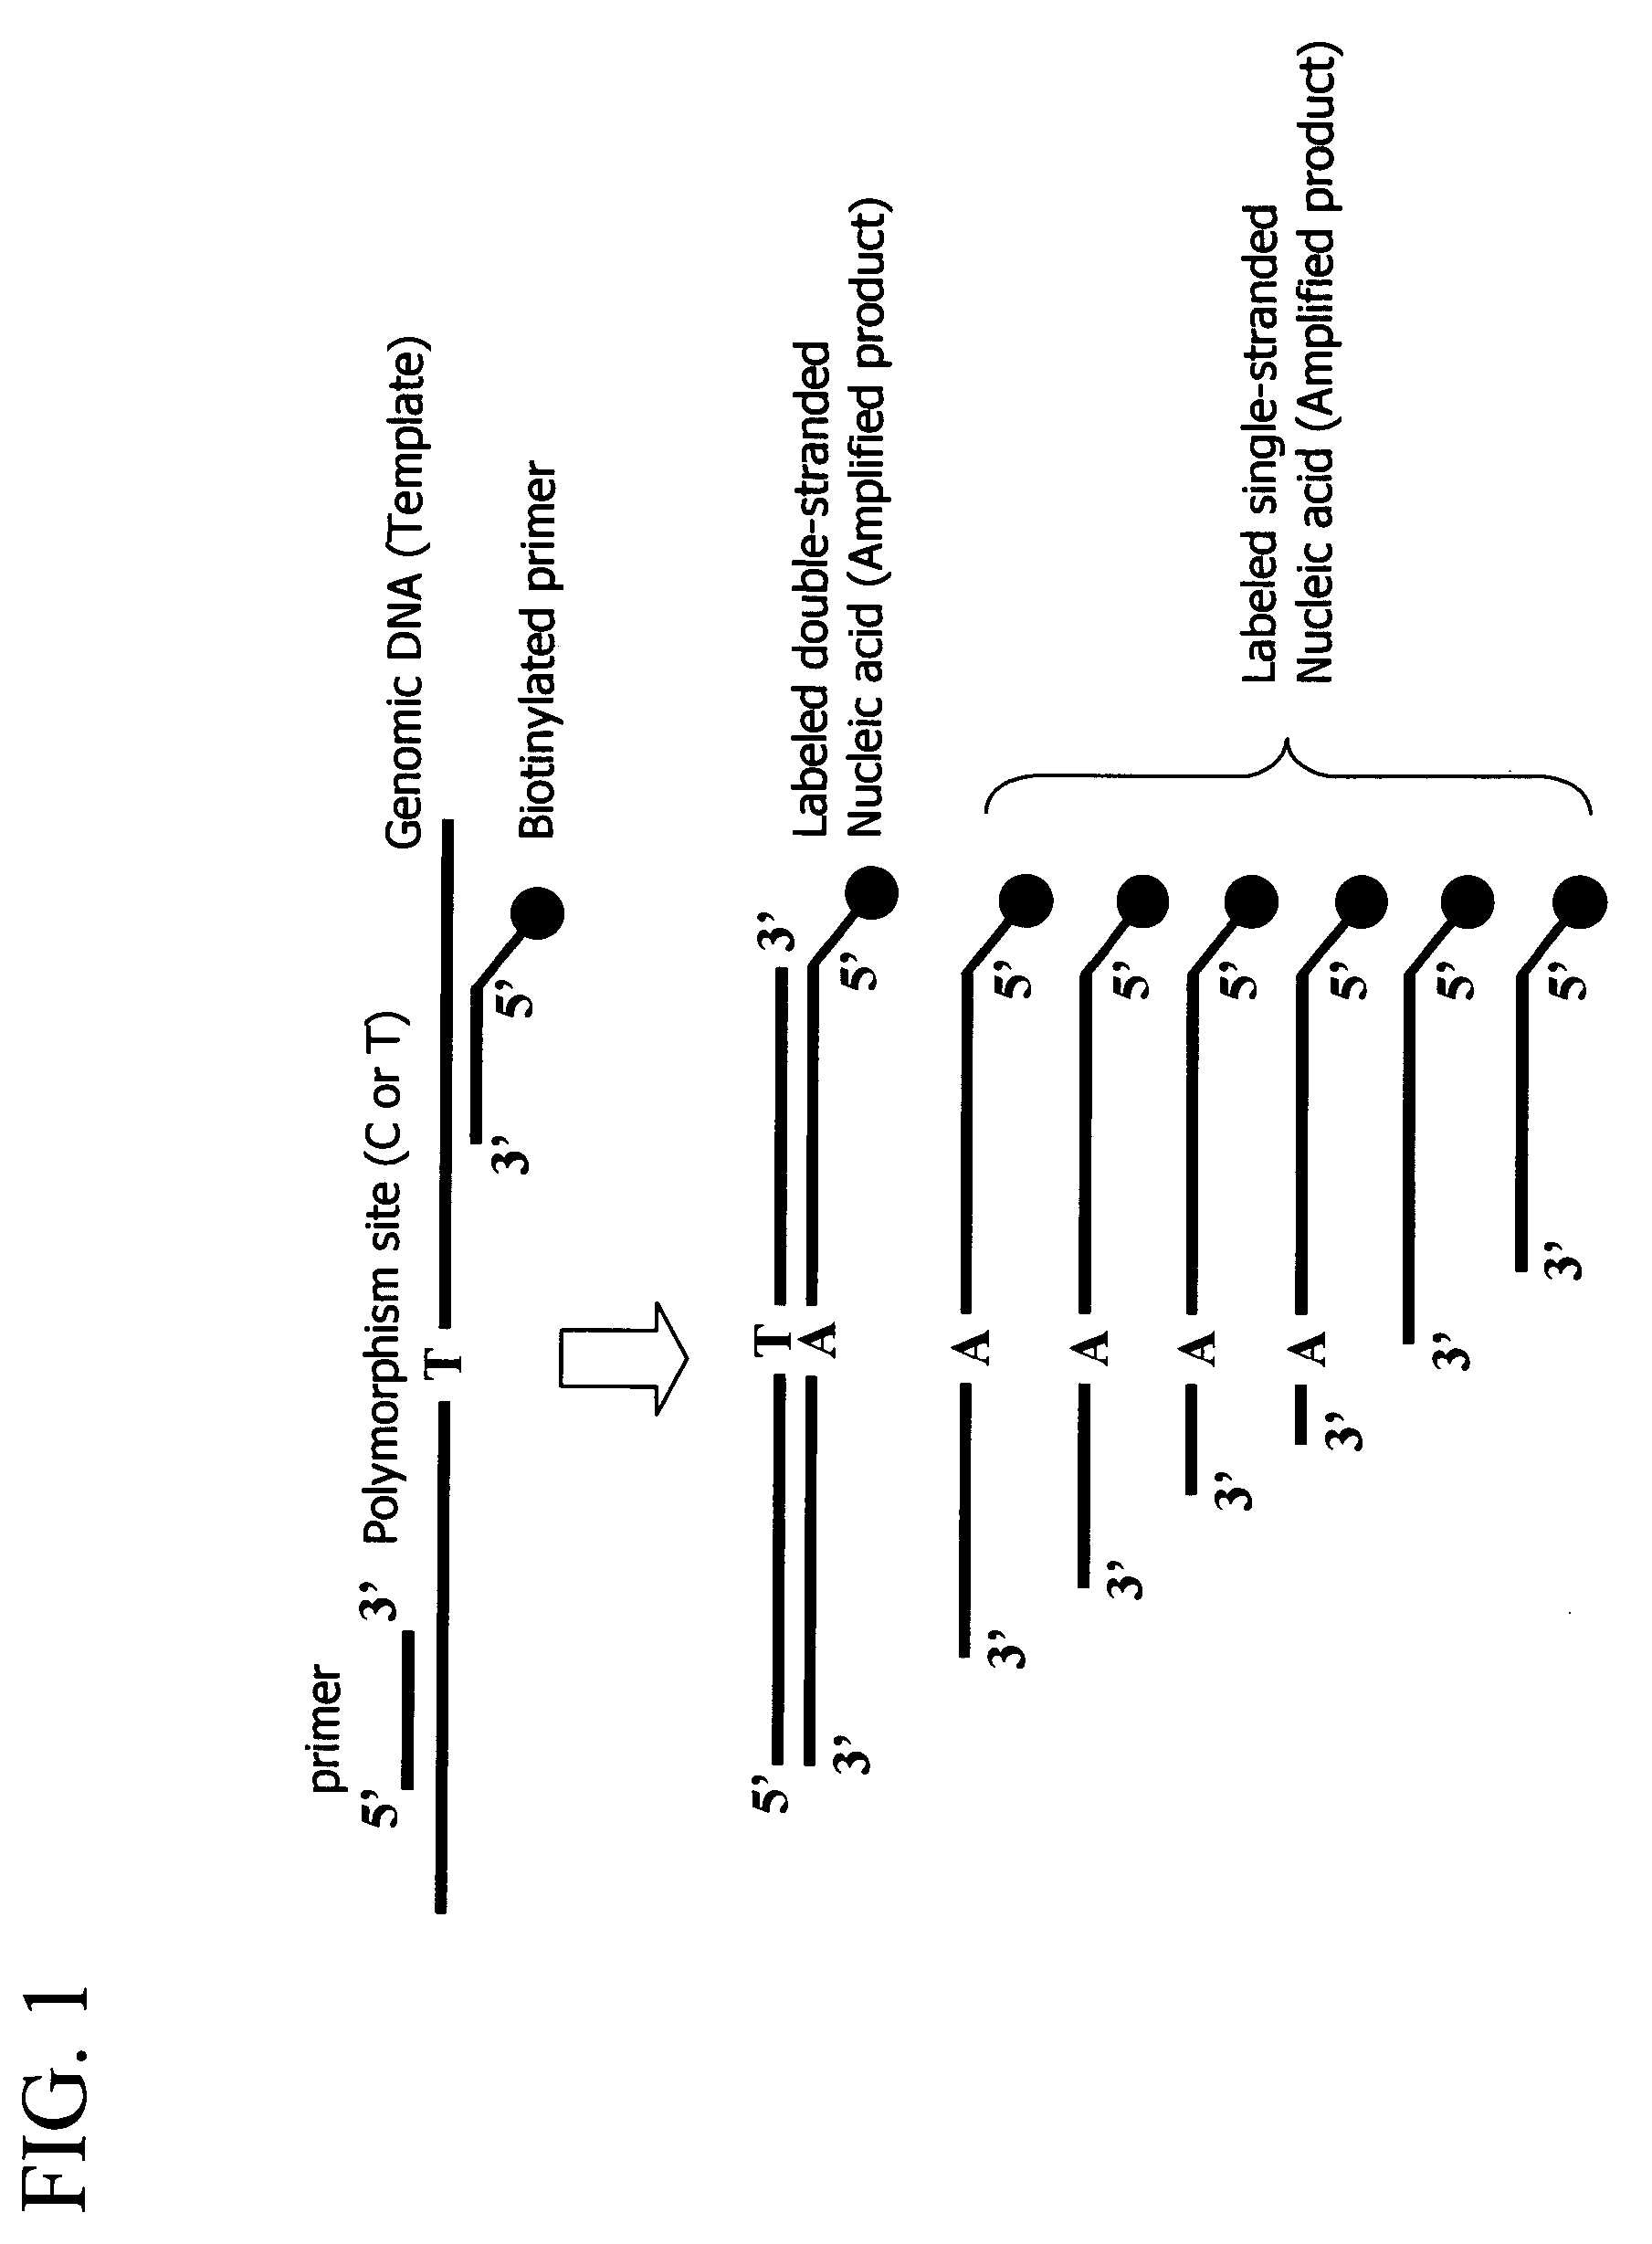 Method for detecting a nucleic acid comprising asymmetrical amplification